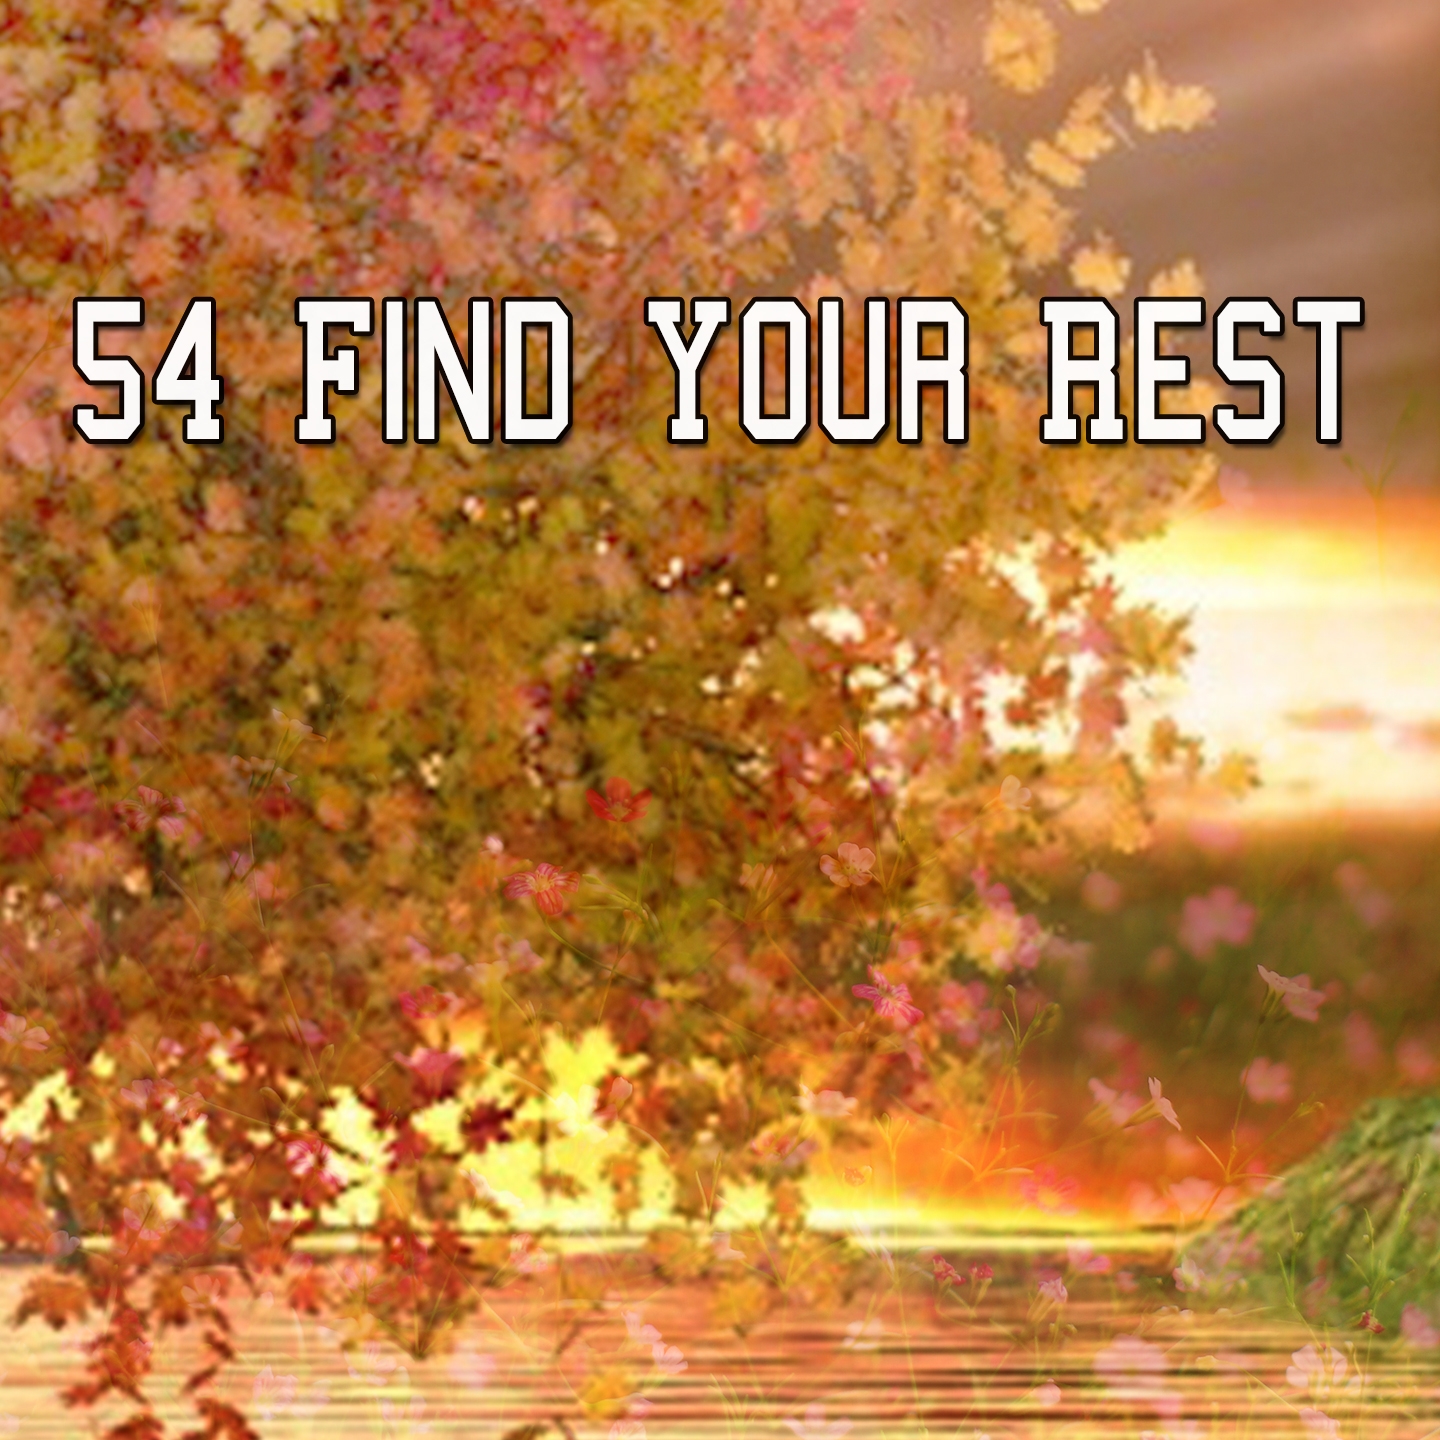 54 Find Your Rest